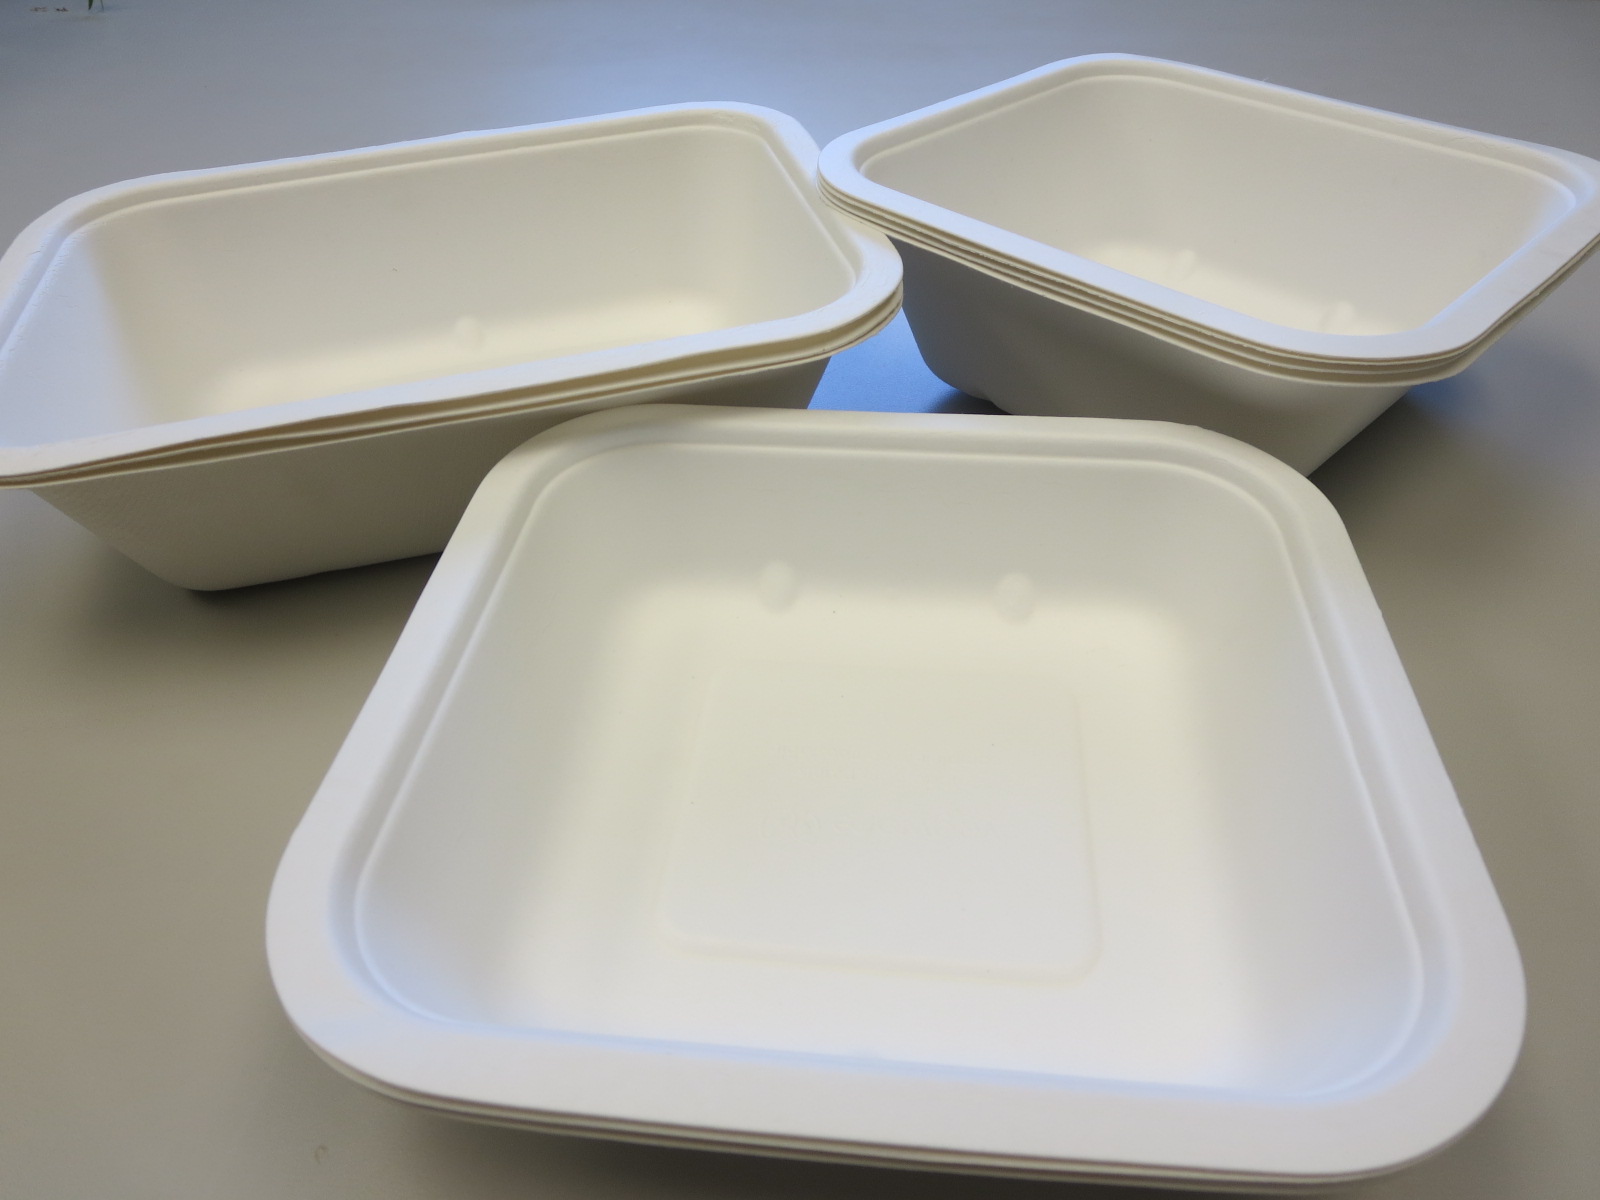 V4-GB16 Vegware Compostable Bagasse Gourmet Food Containers (16-ounce)